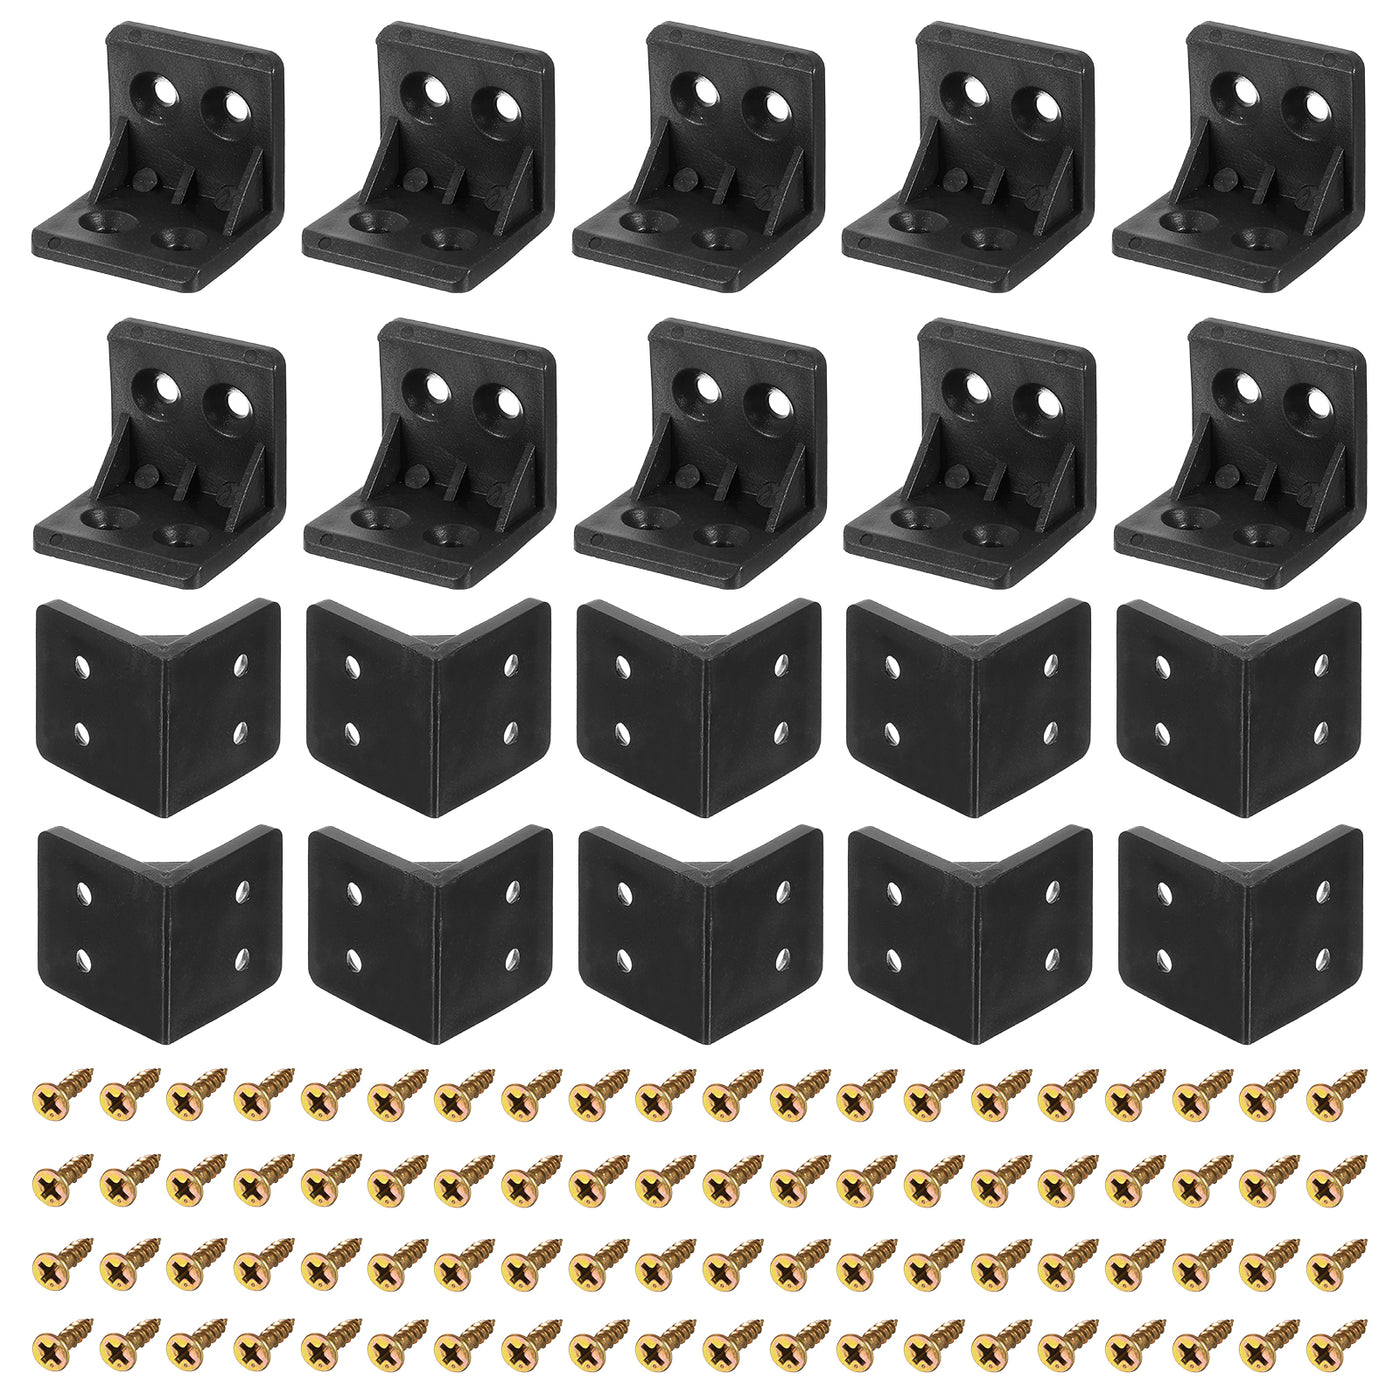 uxcell Uxcell 50Pcs 90 Degree Plastic Corner Braces, 27.3x27x27mm Nylon Shelf Right Angle Brackets with Screws for Cabinets, Cupboards (Black)